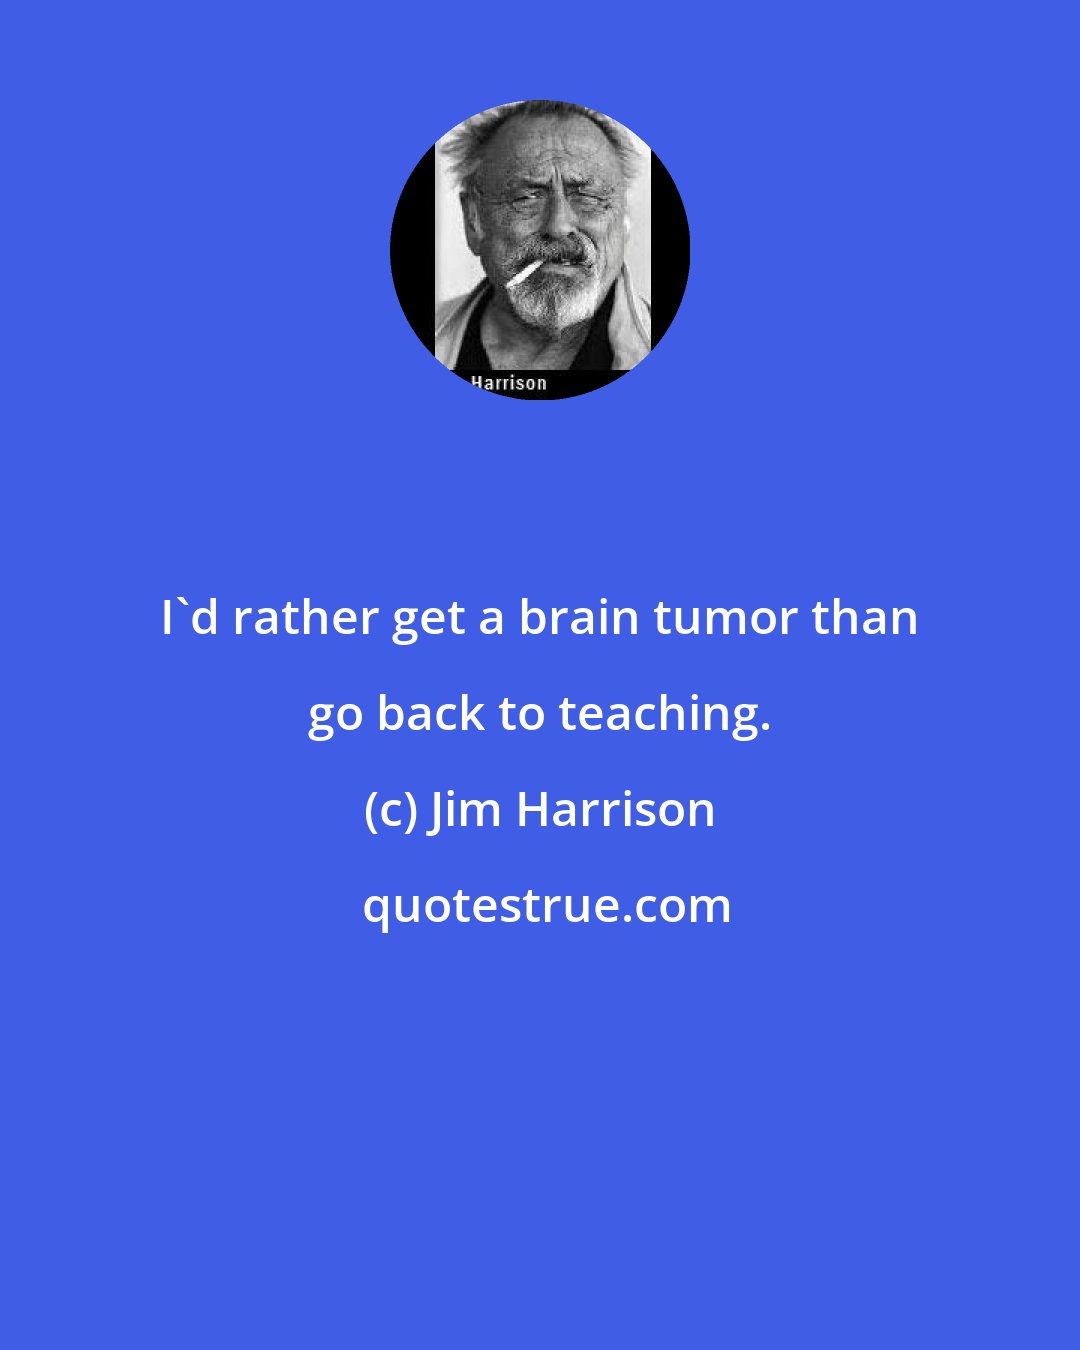 Jim Harrison: I'd rather get a brain tumor than go back to teaching.